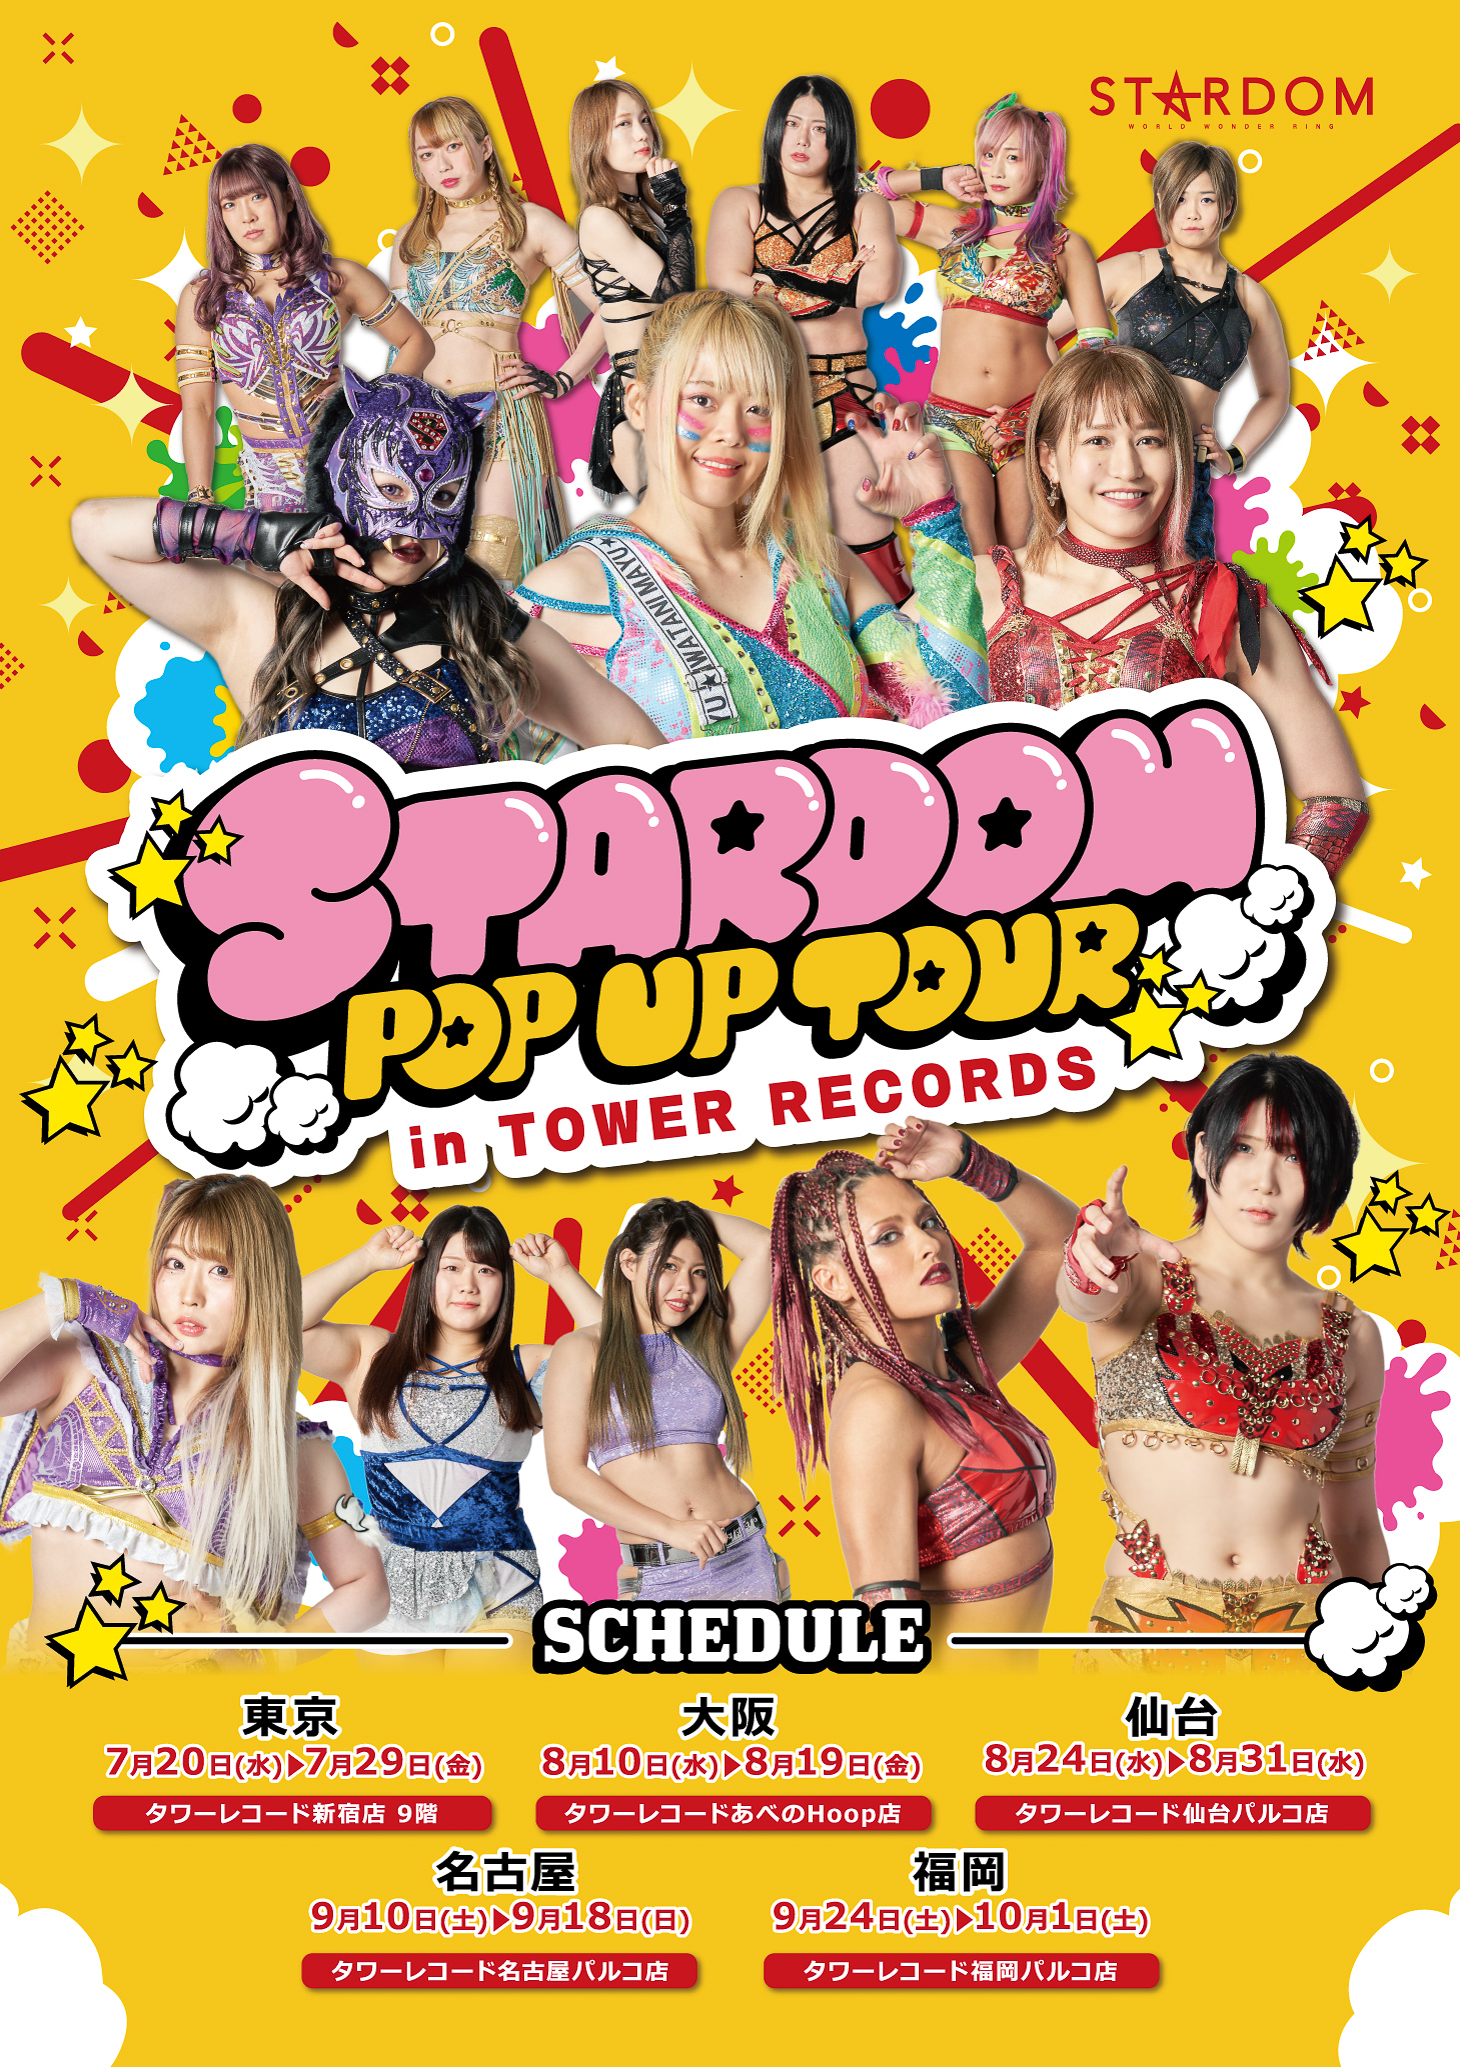 NEWS】STARDOM POP UP TOUR in TOWER RECORDS グッズ情報解禁！ – スターダム✪STARDOM